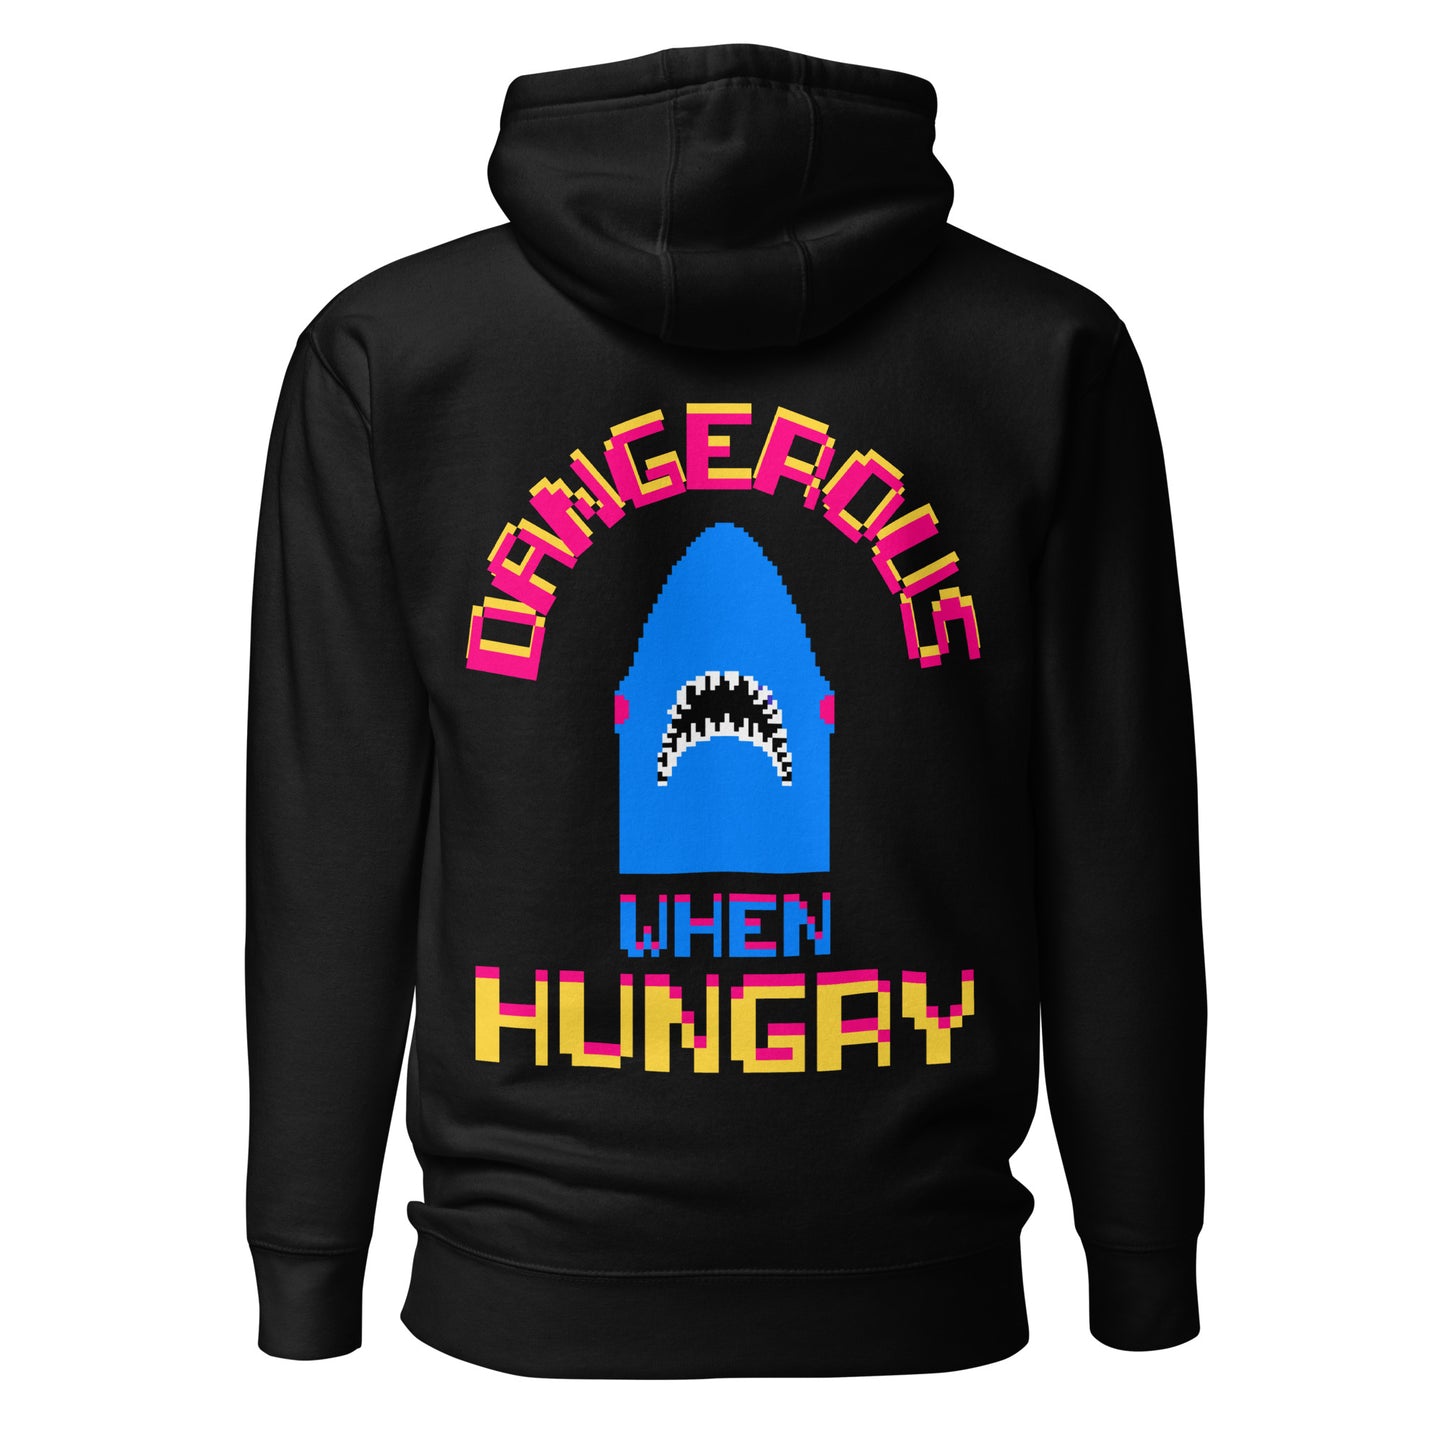 Embroidered Center Chest , Printed Back Unisex Hoodie / Hooded Sweatshirt "Hungry Shark"